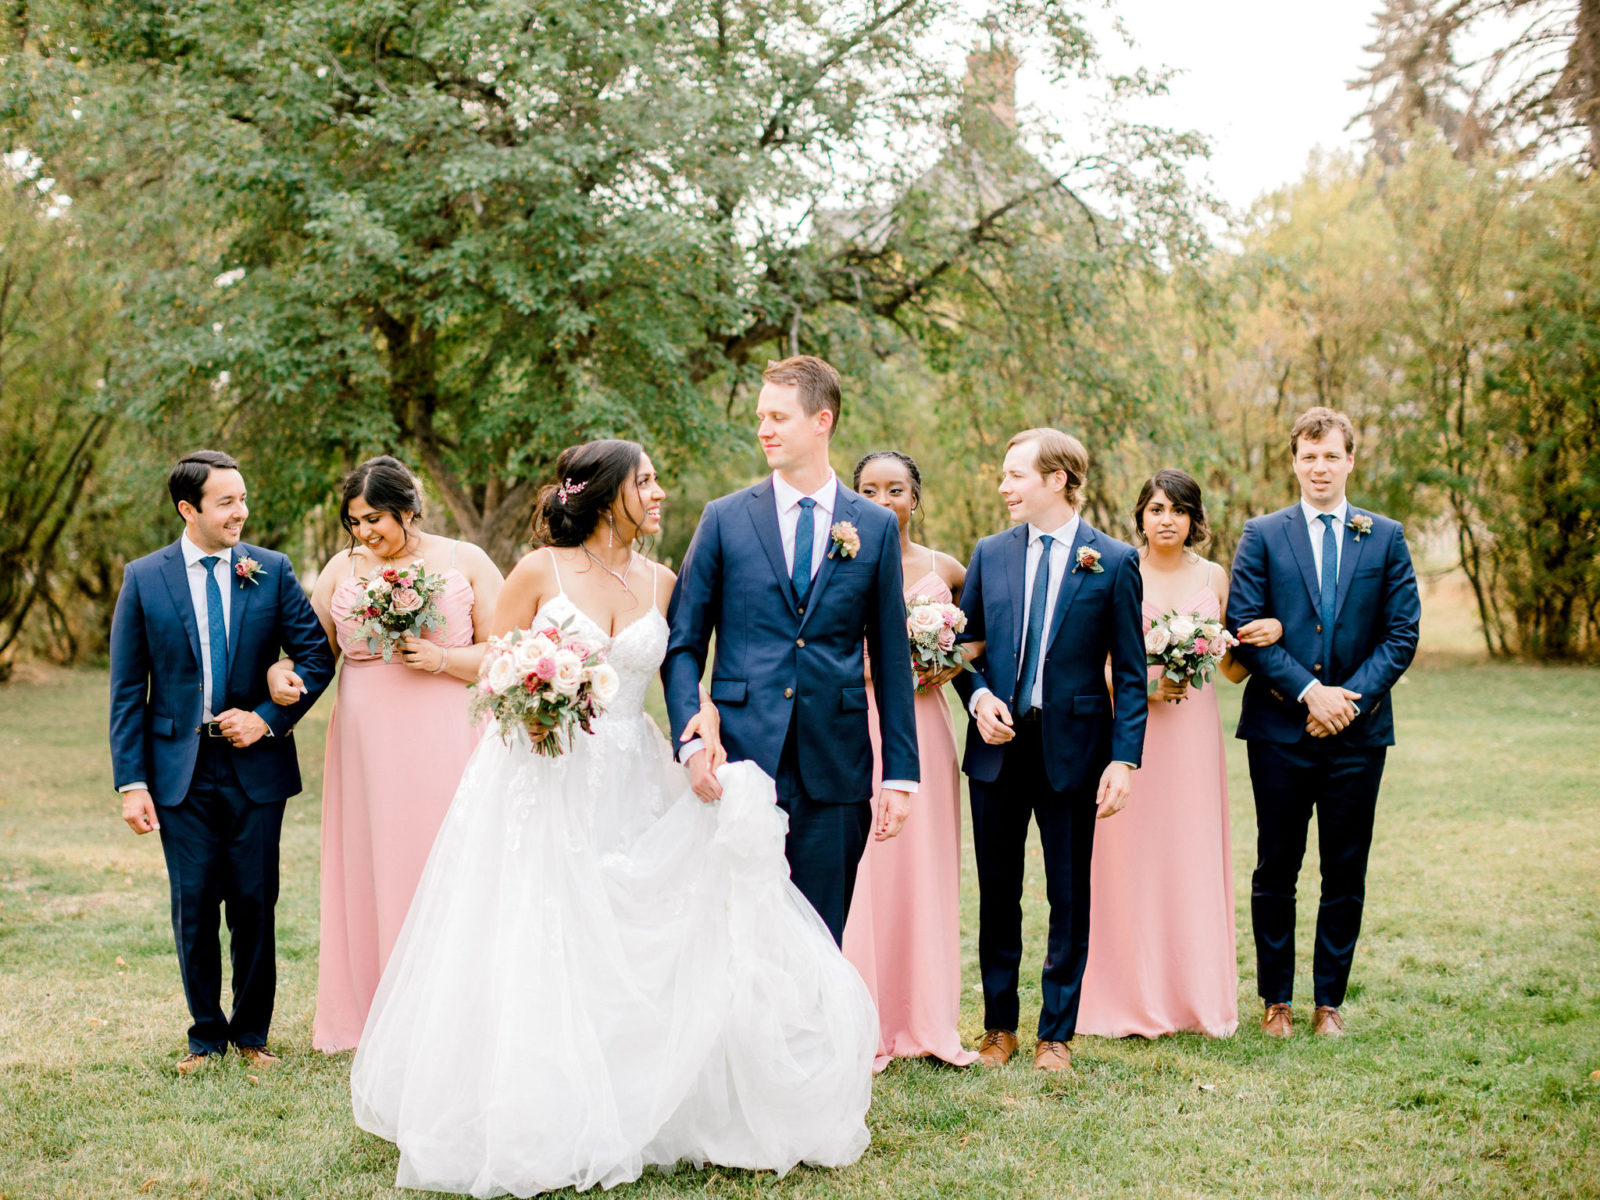 Blush and navy wedding colour inspiration with bridesmaid in blush gowns and groomsmen in navy suits